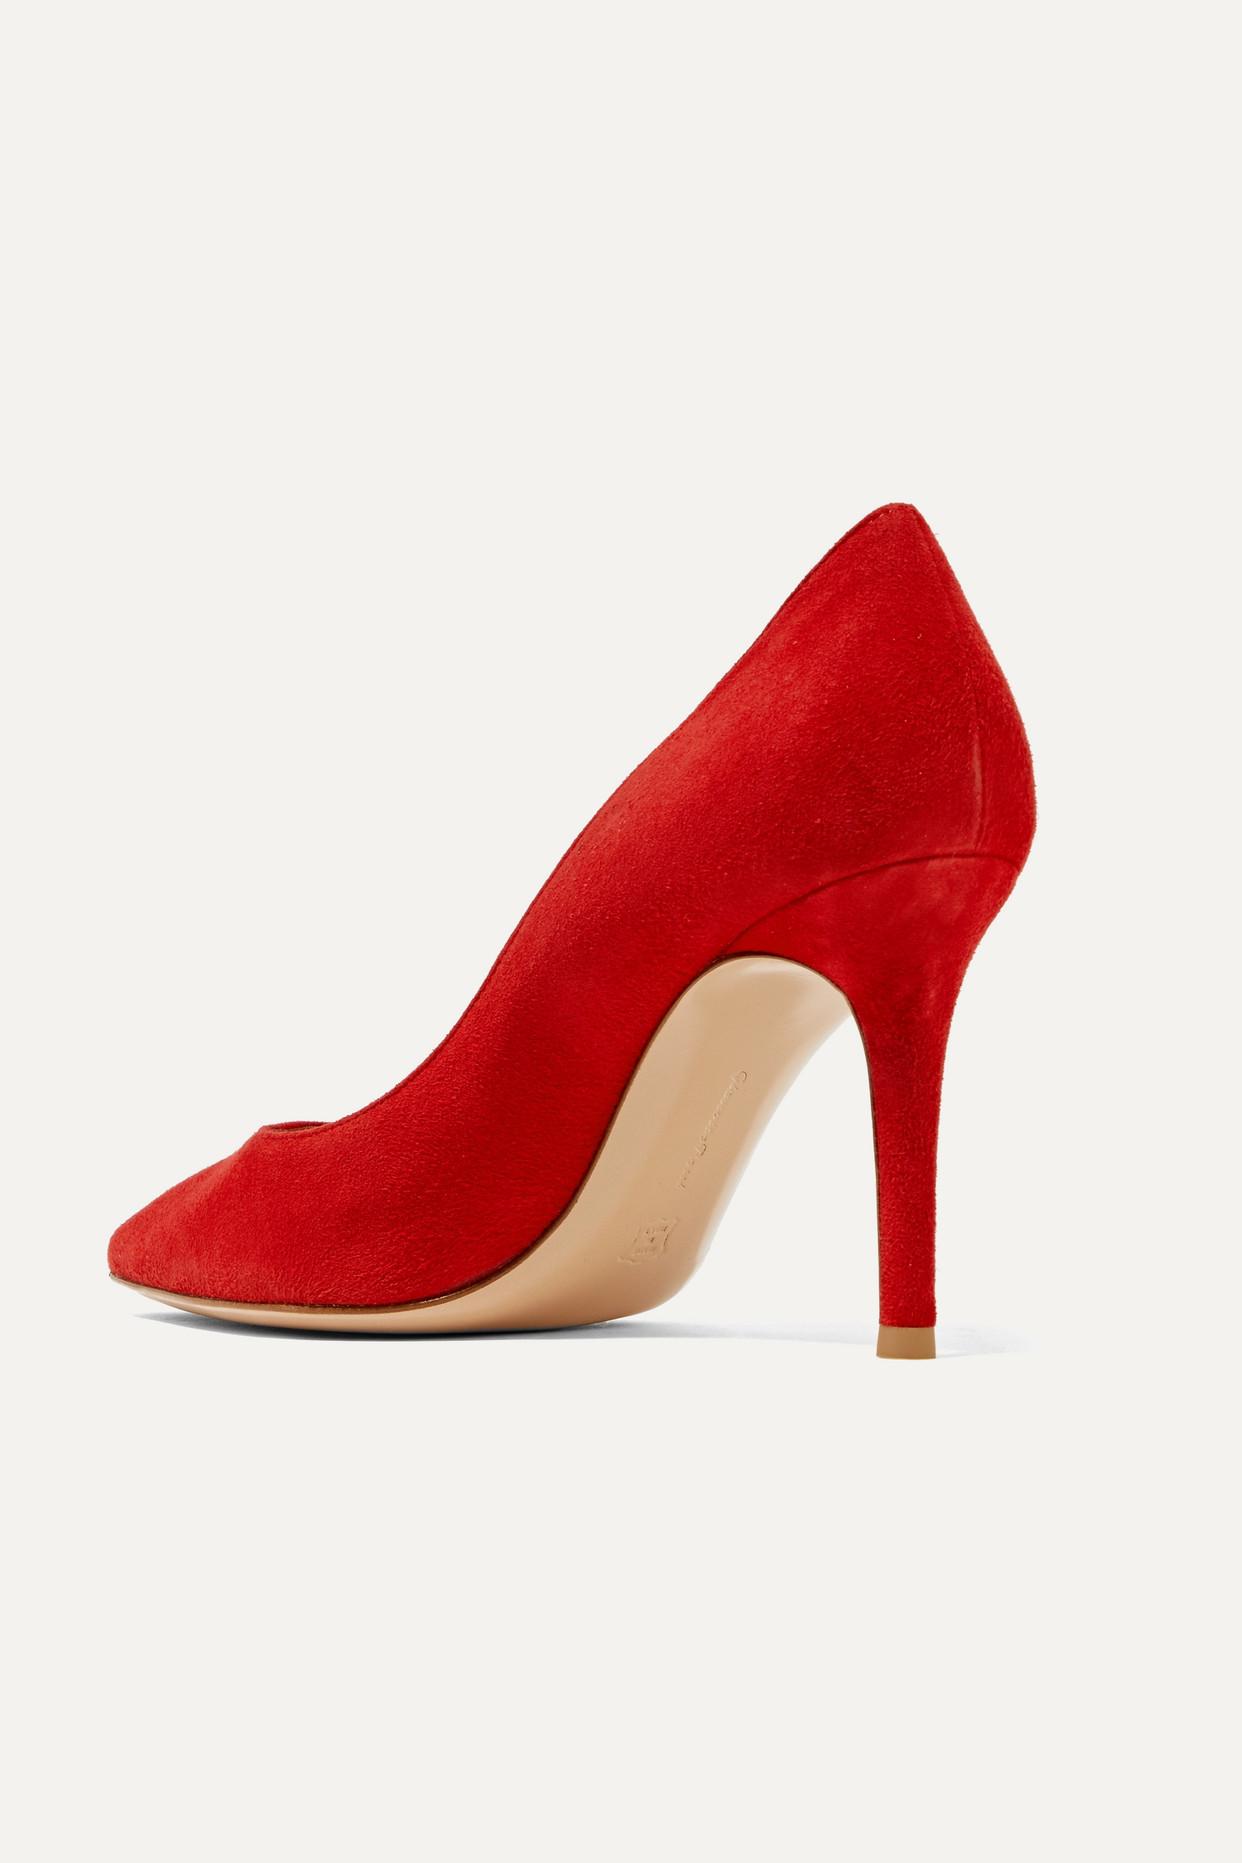 Gianvito Rossi 85 Suede Pumps in Red - Lyst